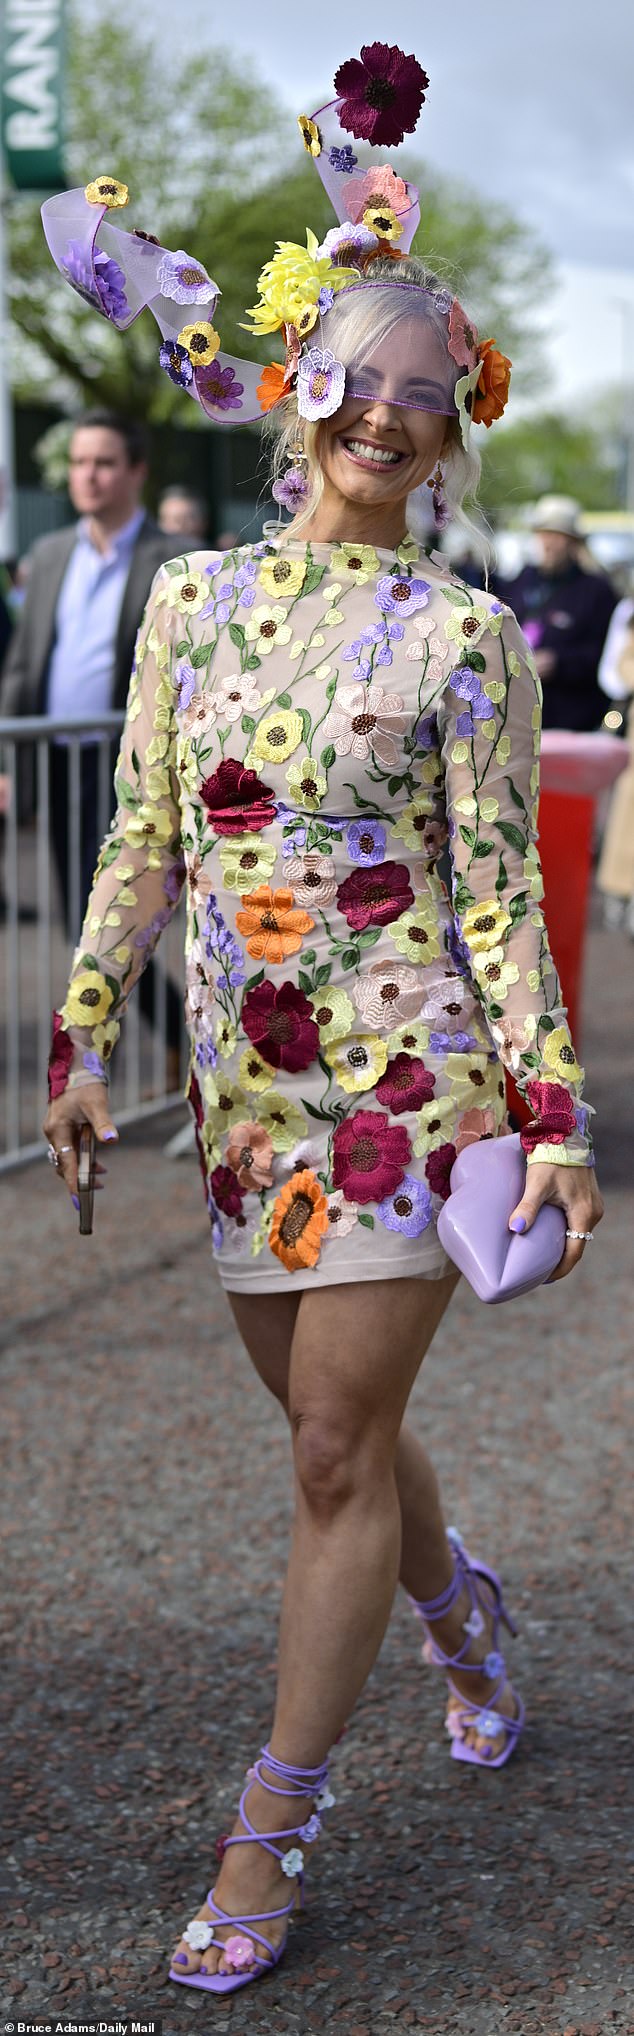 One racegoer wanted to channel spring and decided to dress head to toe in flowers